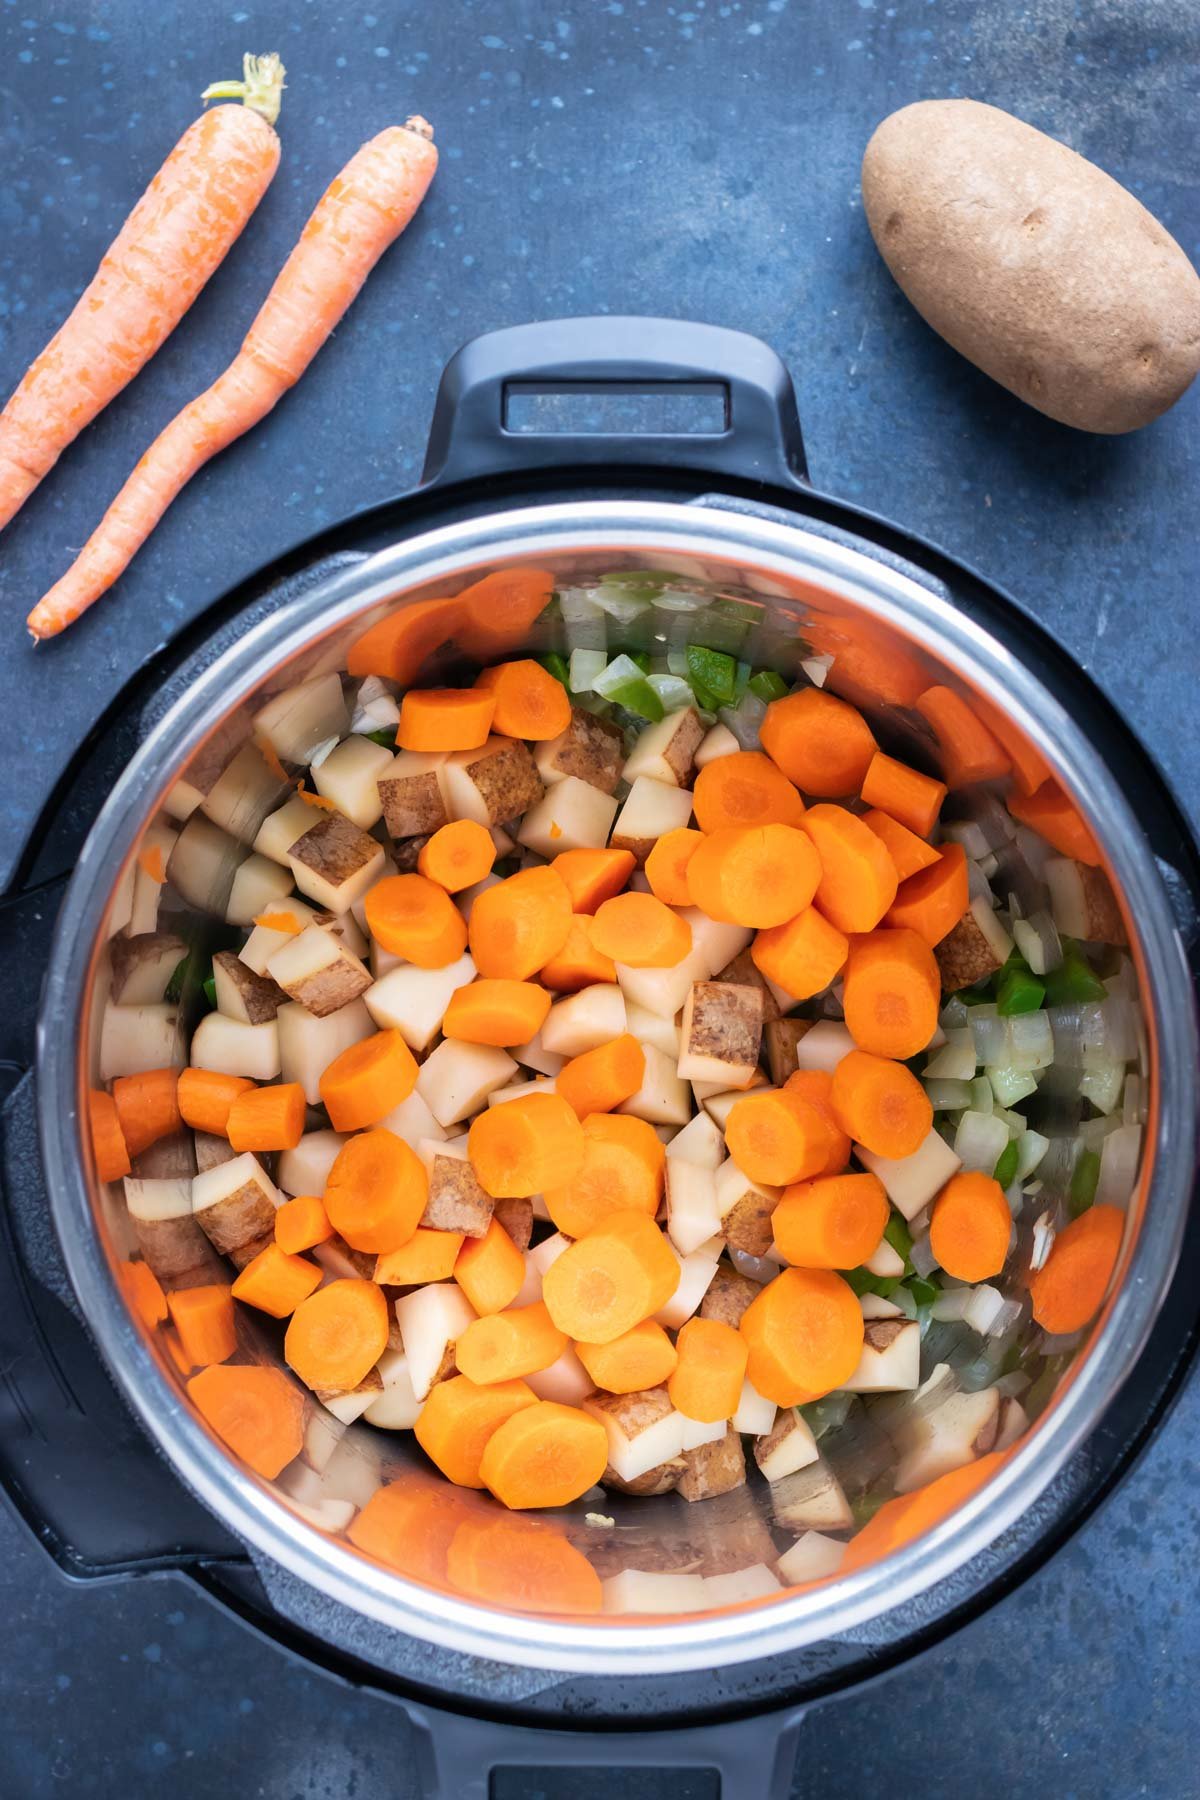 Carrots are added to the sauteed veggies.